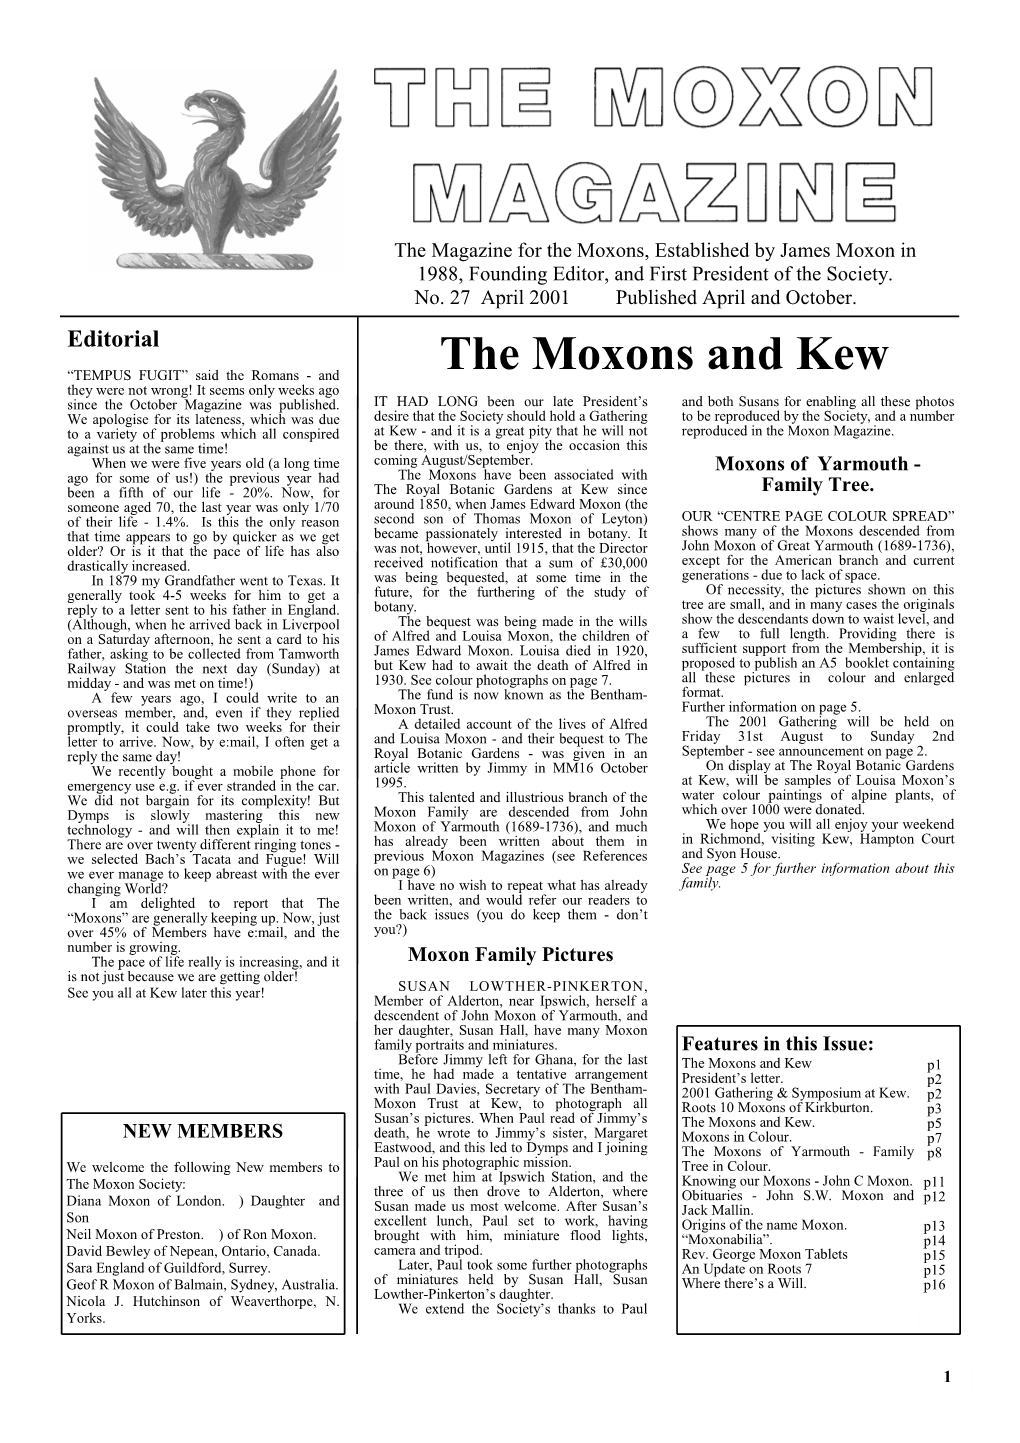 The Moxons and Kew They Were Not Wrong! It Seems Only Weeks Ago Since the October Magazine Was Published